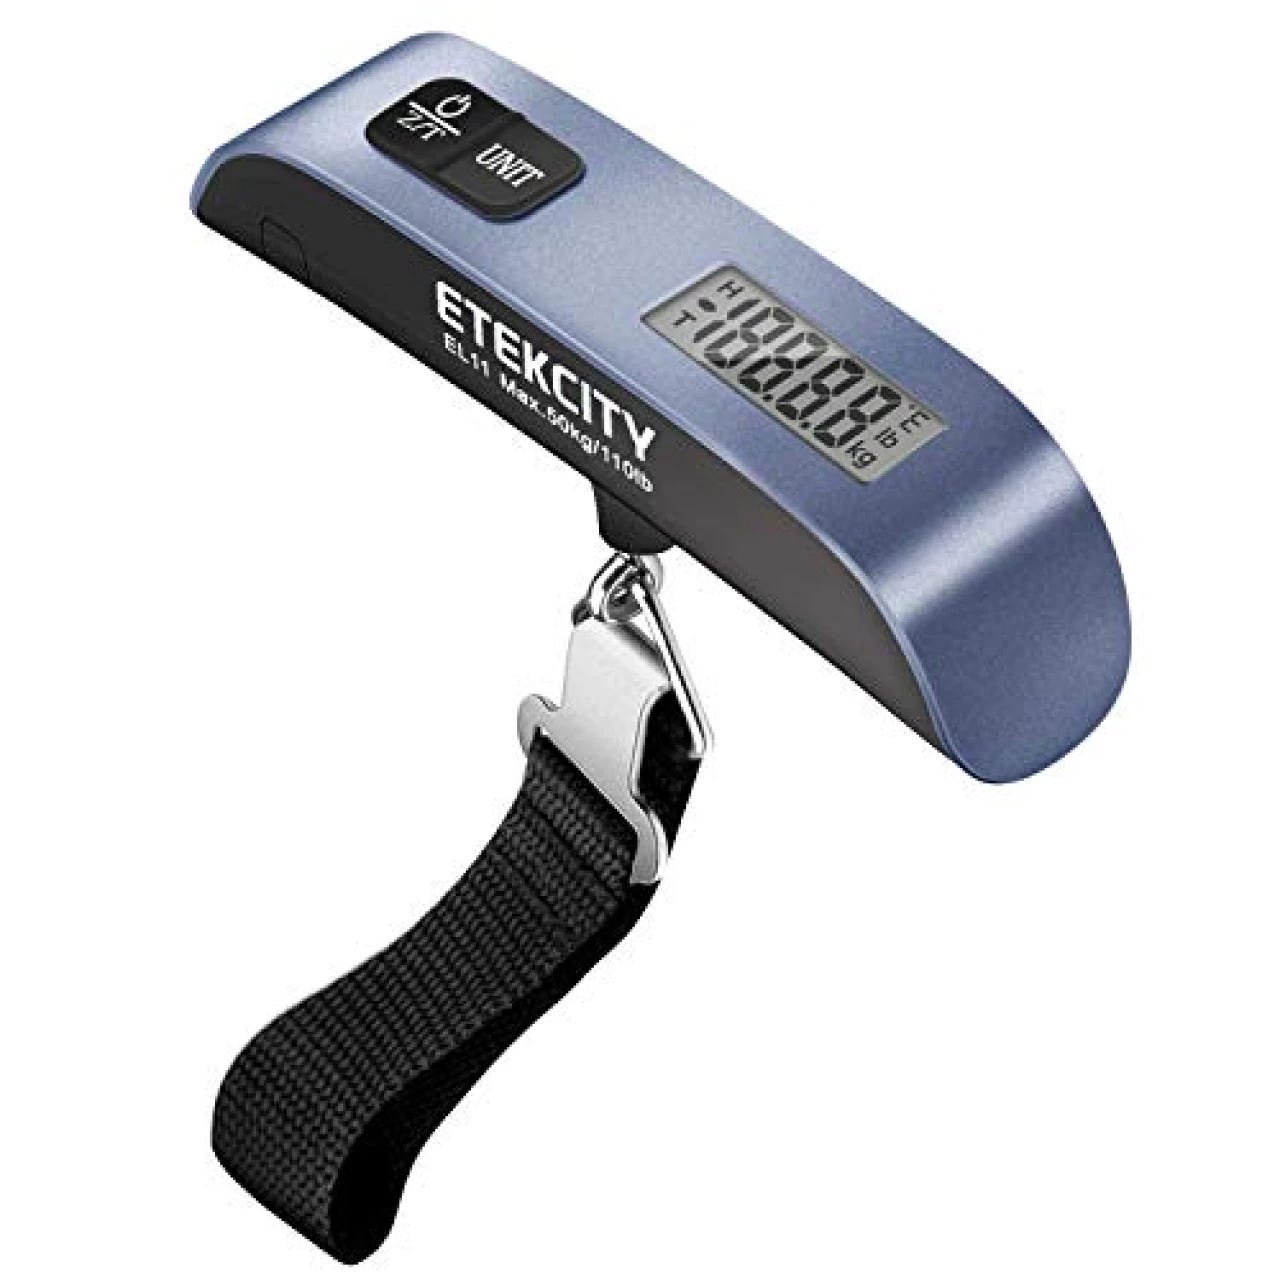 Digital Luggage Scale - Portable and Accurate